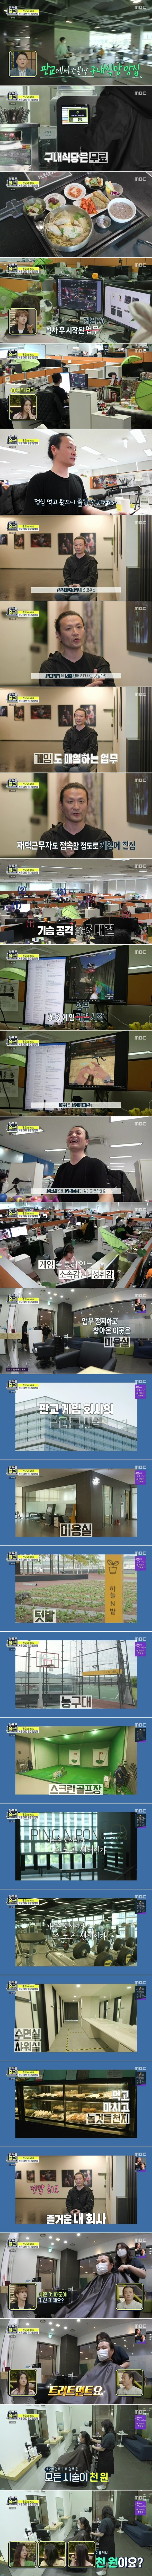 Starting salary of 45 million won is the level of in-house welfare of Pangyo game company.jpg